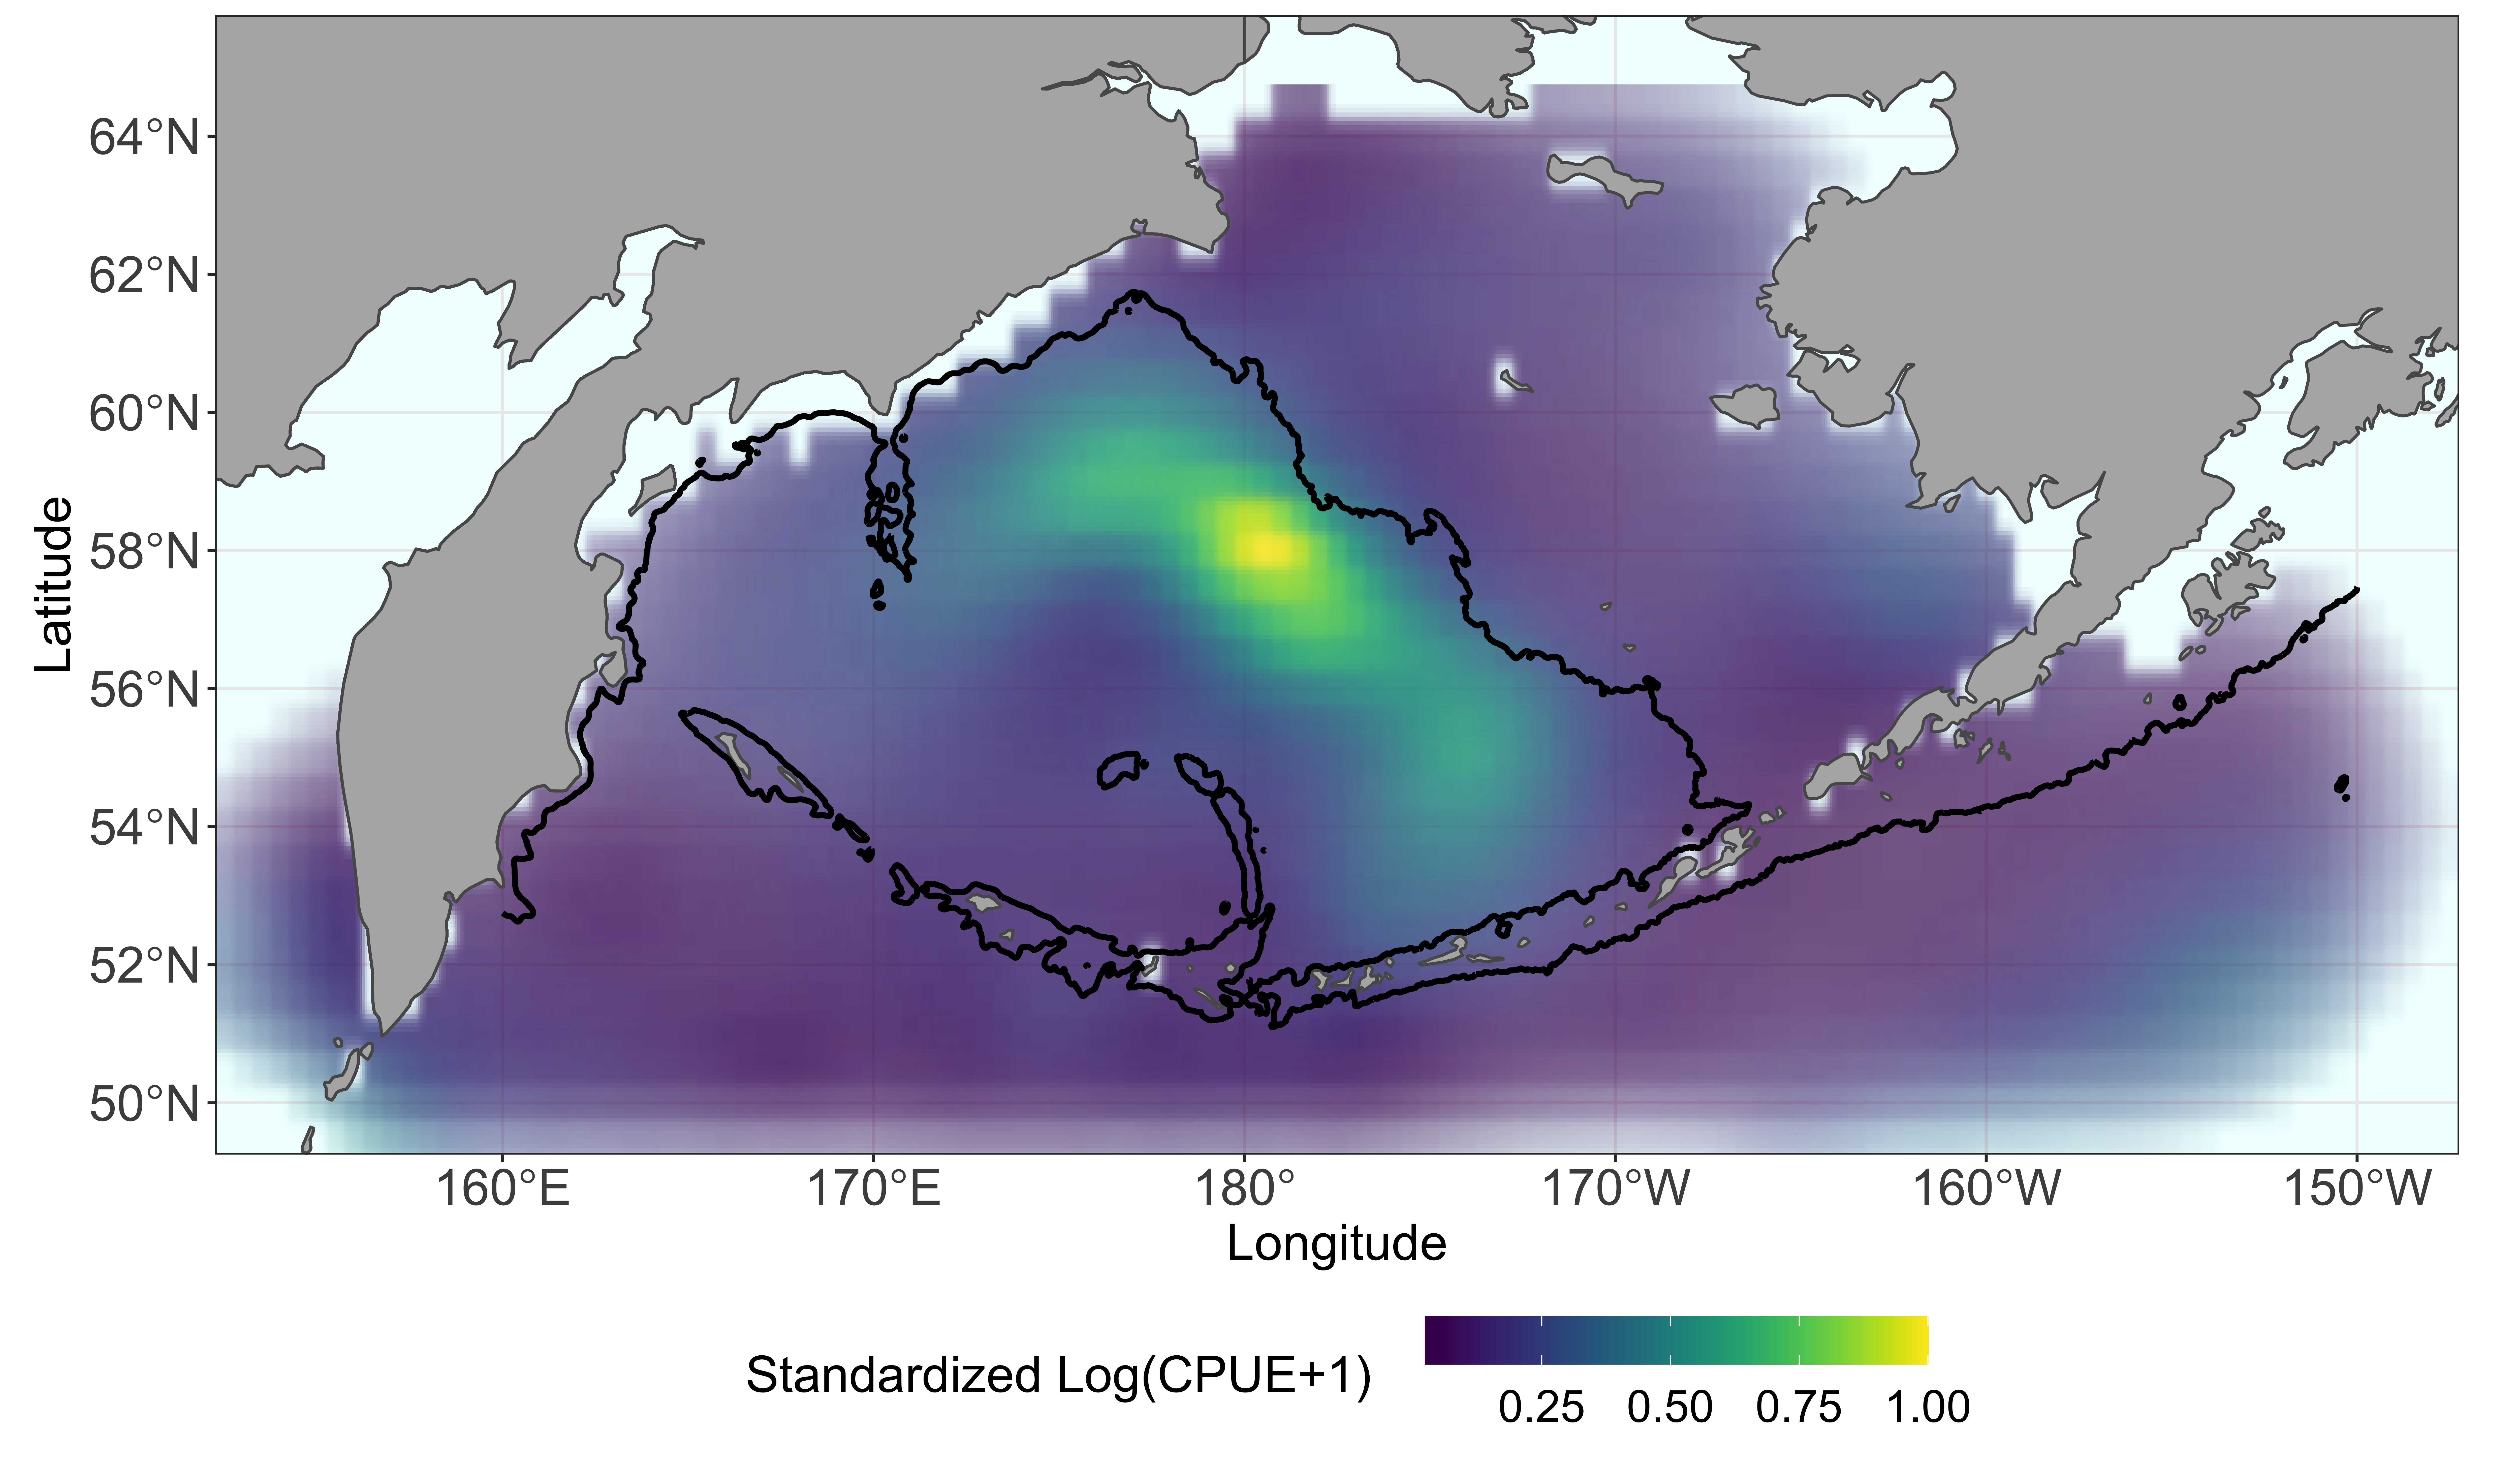 A map using information from a new database shows relative abundance of Chinook salmon in the Bering Sea during June and July. A hotspot of abundance appears to correspond with a region of known high productivity along the Bering Sea shelf break.